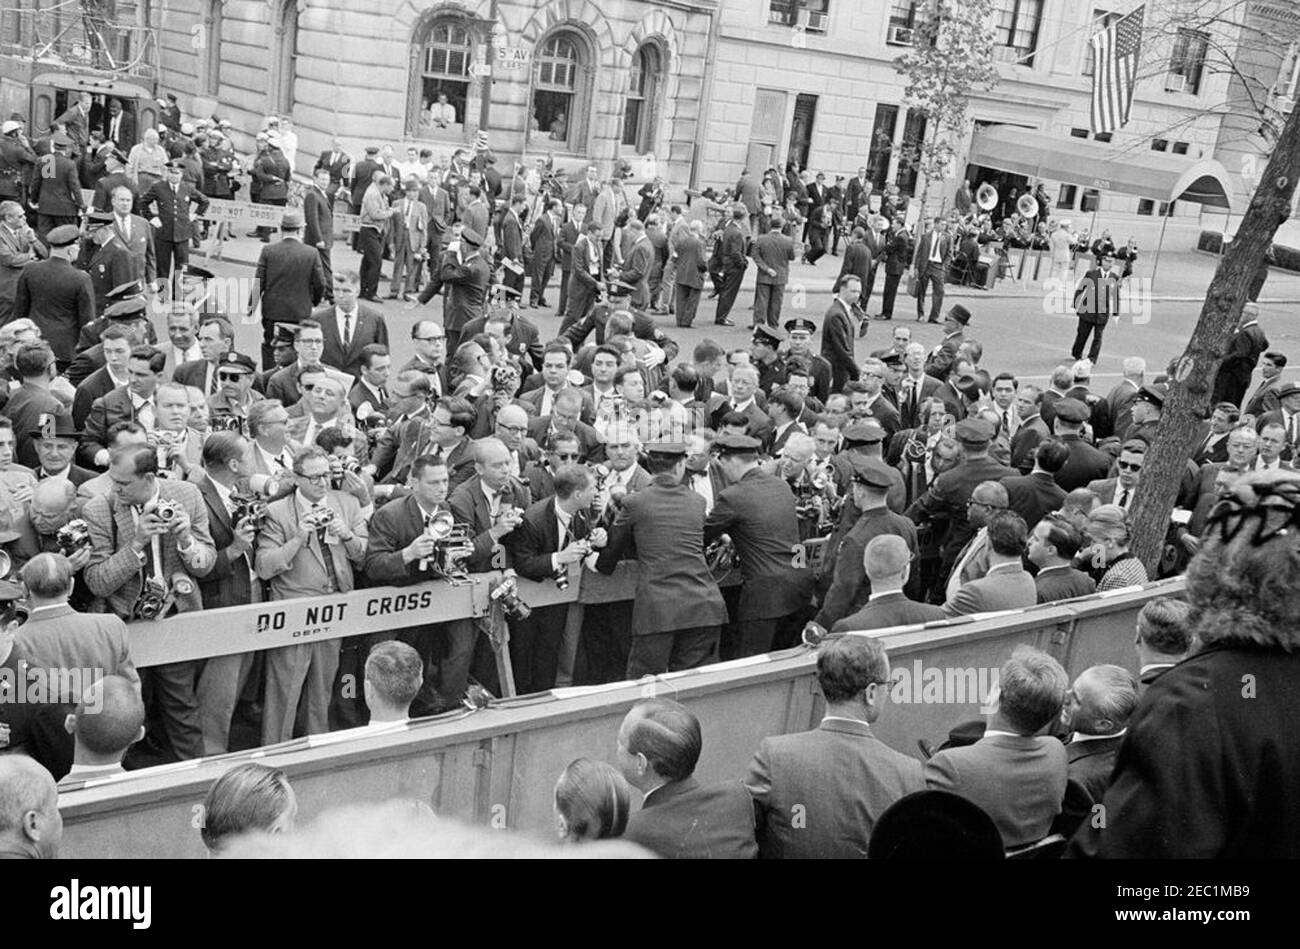 Congressional campaign trip: New York City, Columbus Day parade. View of news photographers on Fifth Avenue in New York City, New York, during the Columbus Day Parade. President John F. Kennedy visits with Ambassador of Italy, Sergio Fenoaltea, at lower right. Also pictured: Mayor of New York City, Robert F. Wagner; candidate for Governor of New York, Robert Morgenthau; Governor of New York, Nelson A. Rockefeller; Associate Press Secretary, Andrew T. Hatcher; United Press International (UPI) photographer, Frank Cancellare. President Kennedy traveled to New York as part of a congressional campa Stock Photo